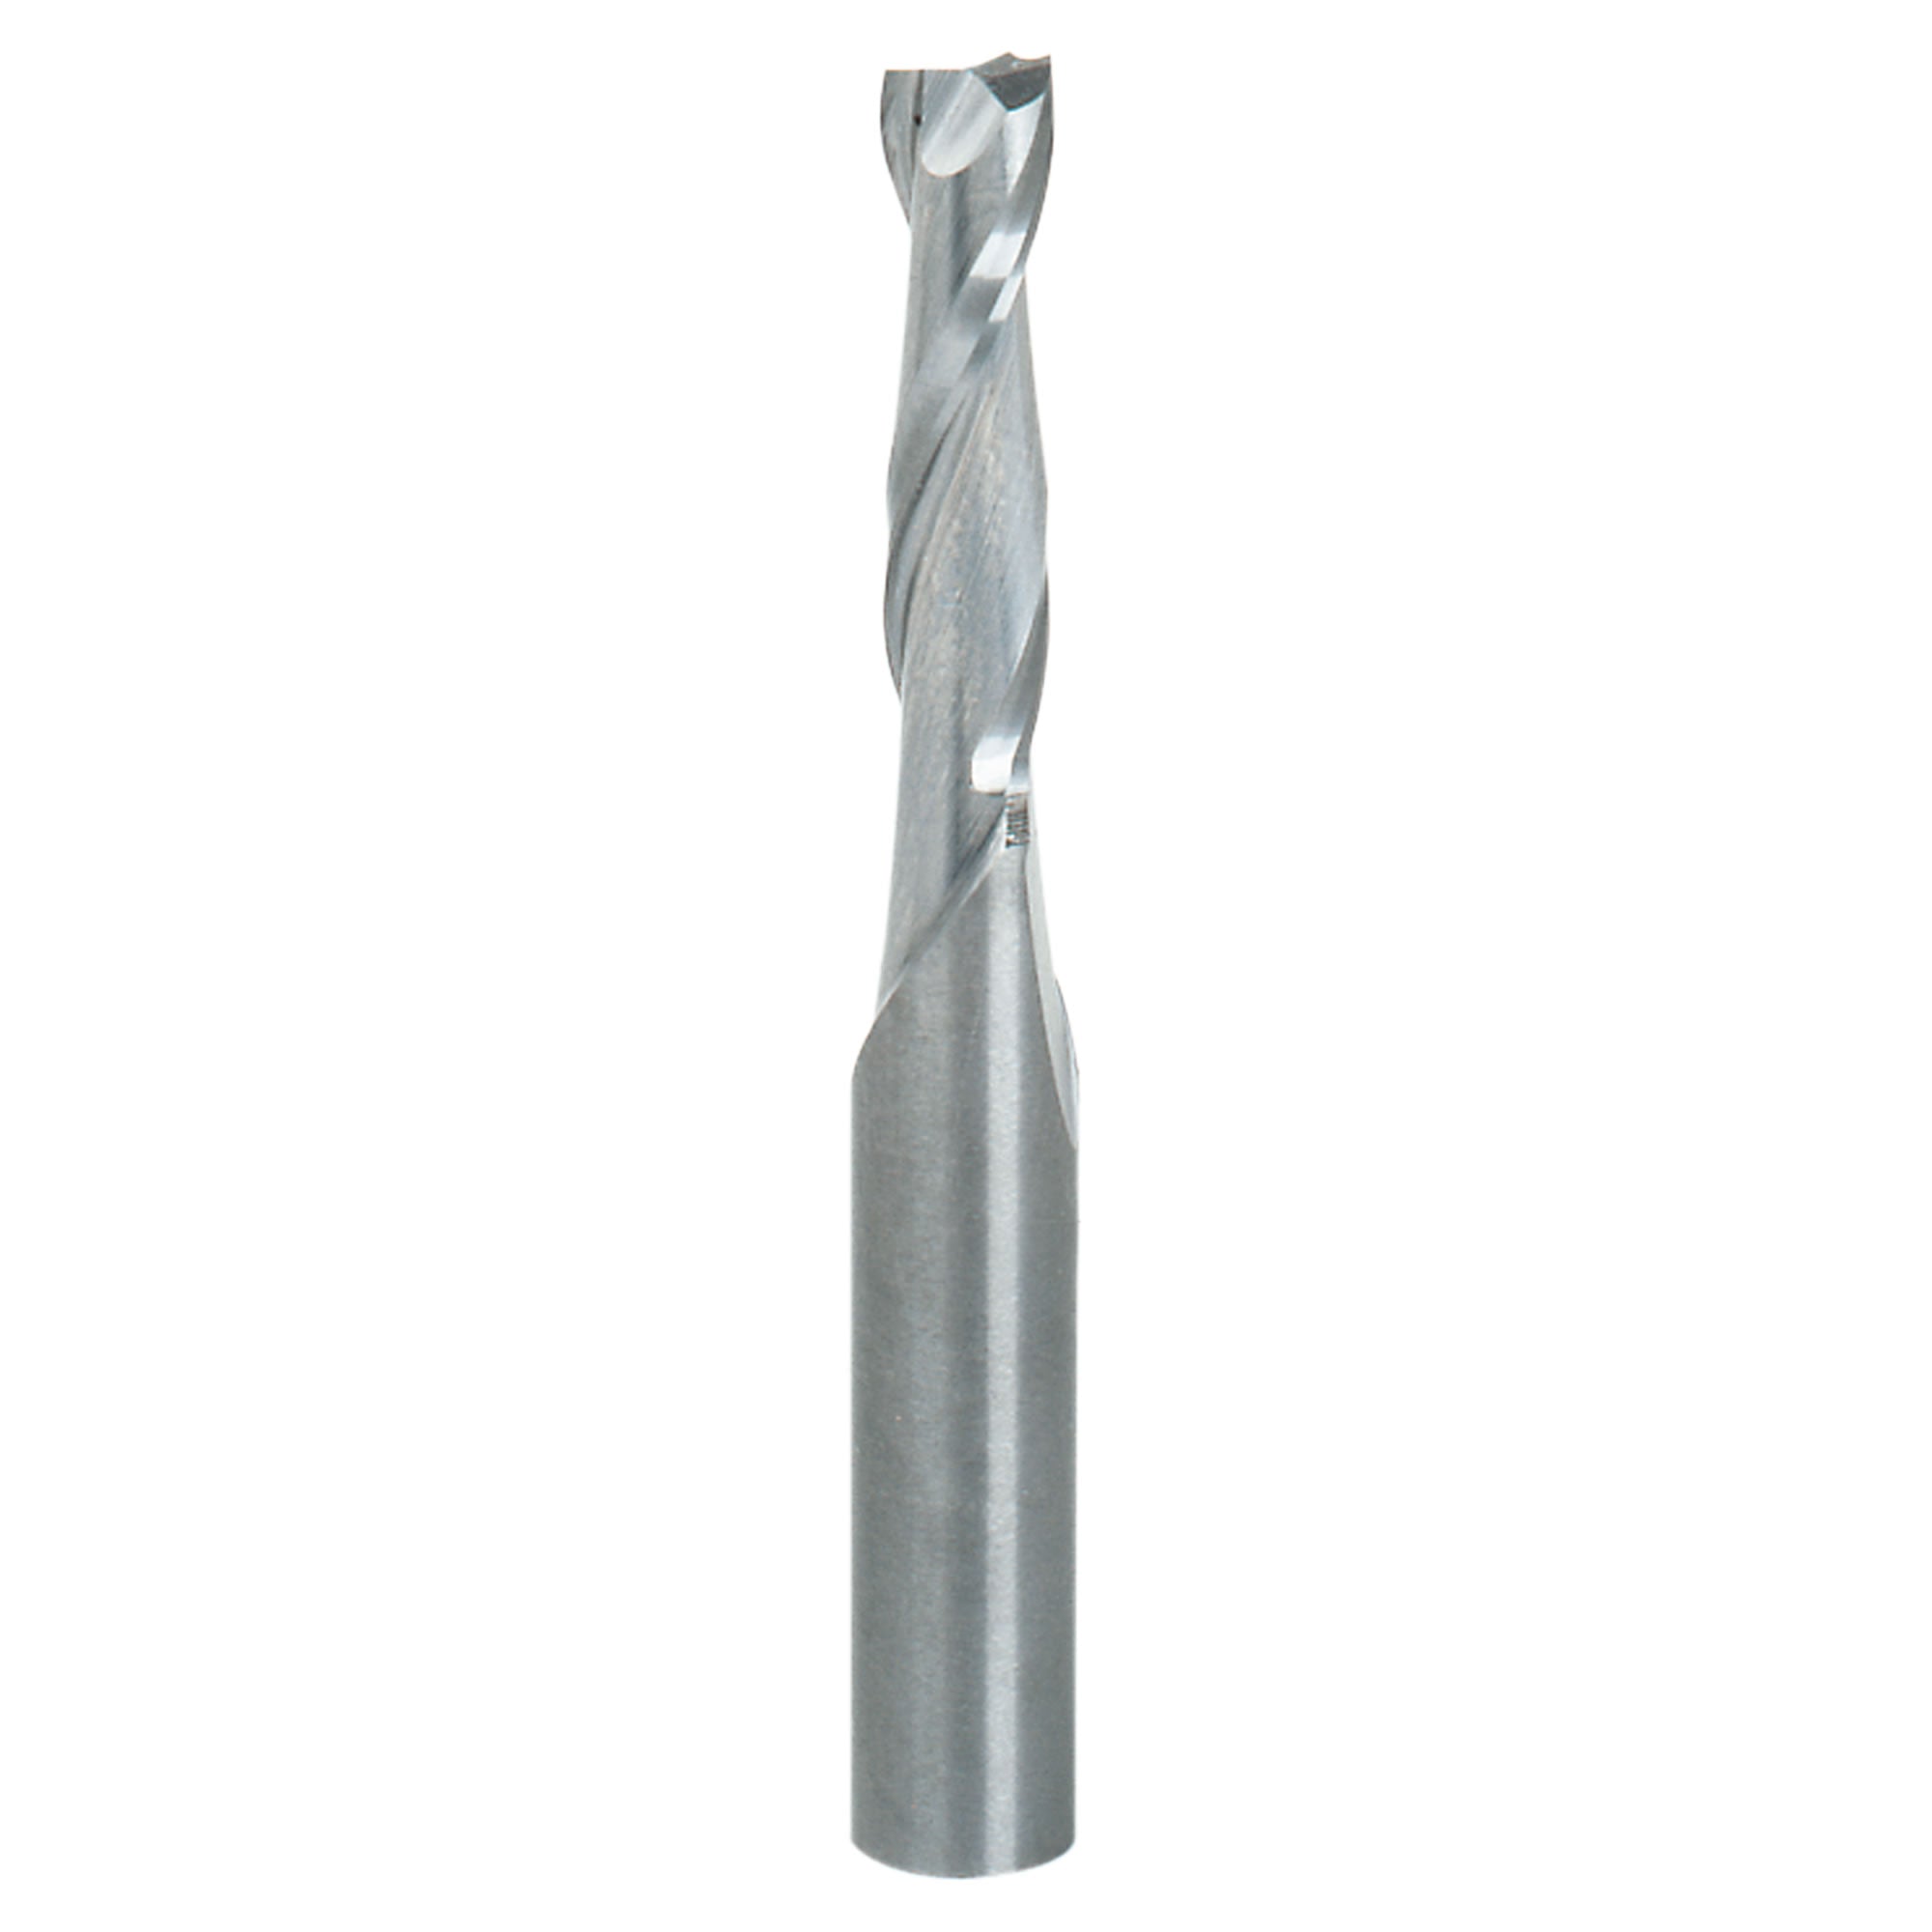 Freud  75-101 3/16" (Dia.) Up Spiral Bit with 1/4" Shank